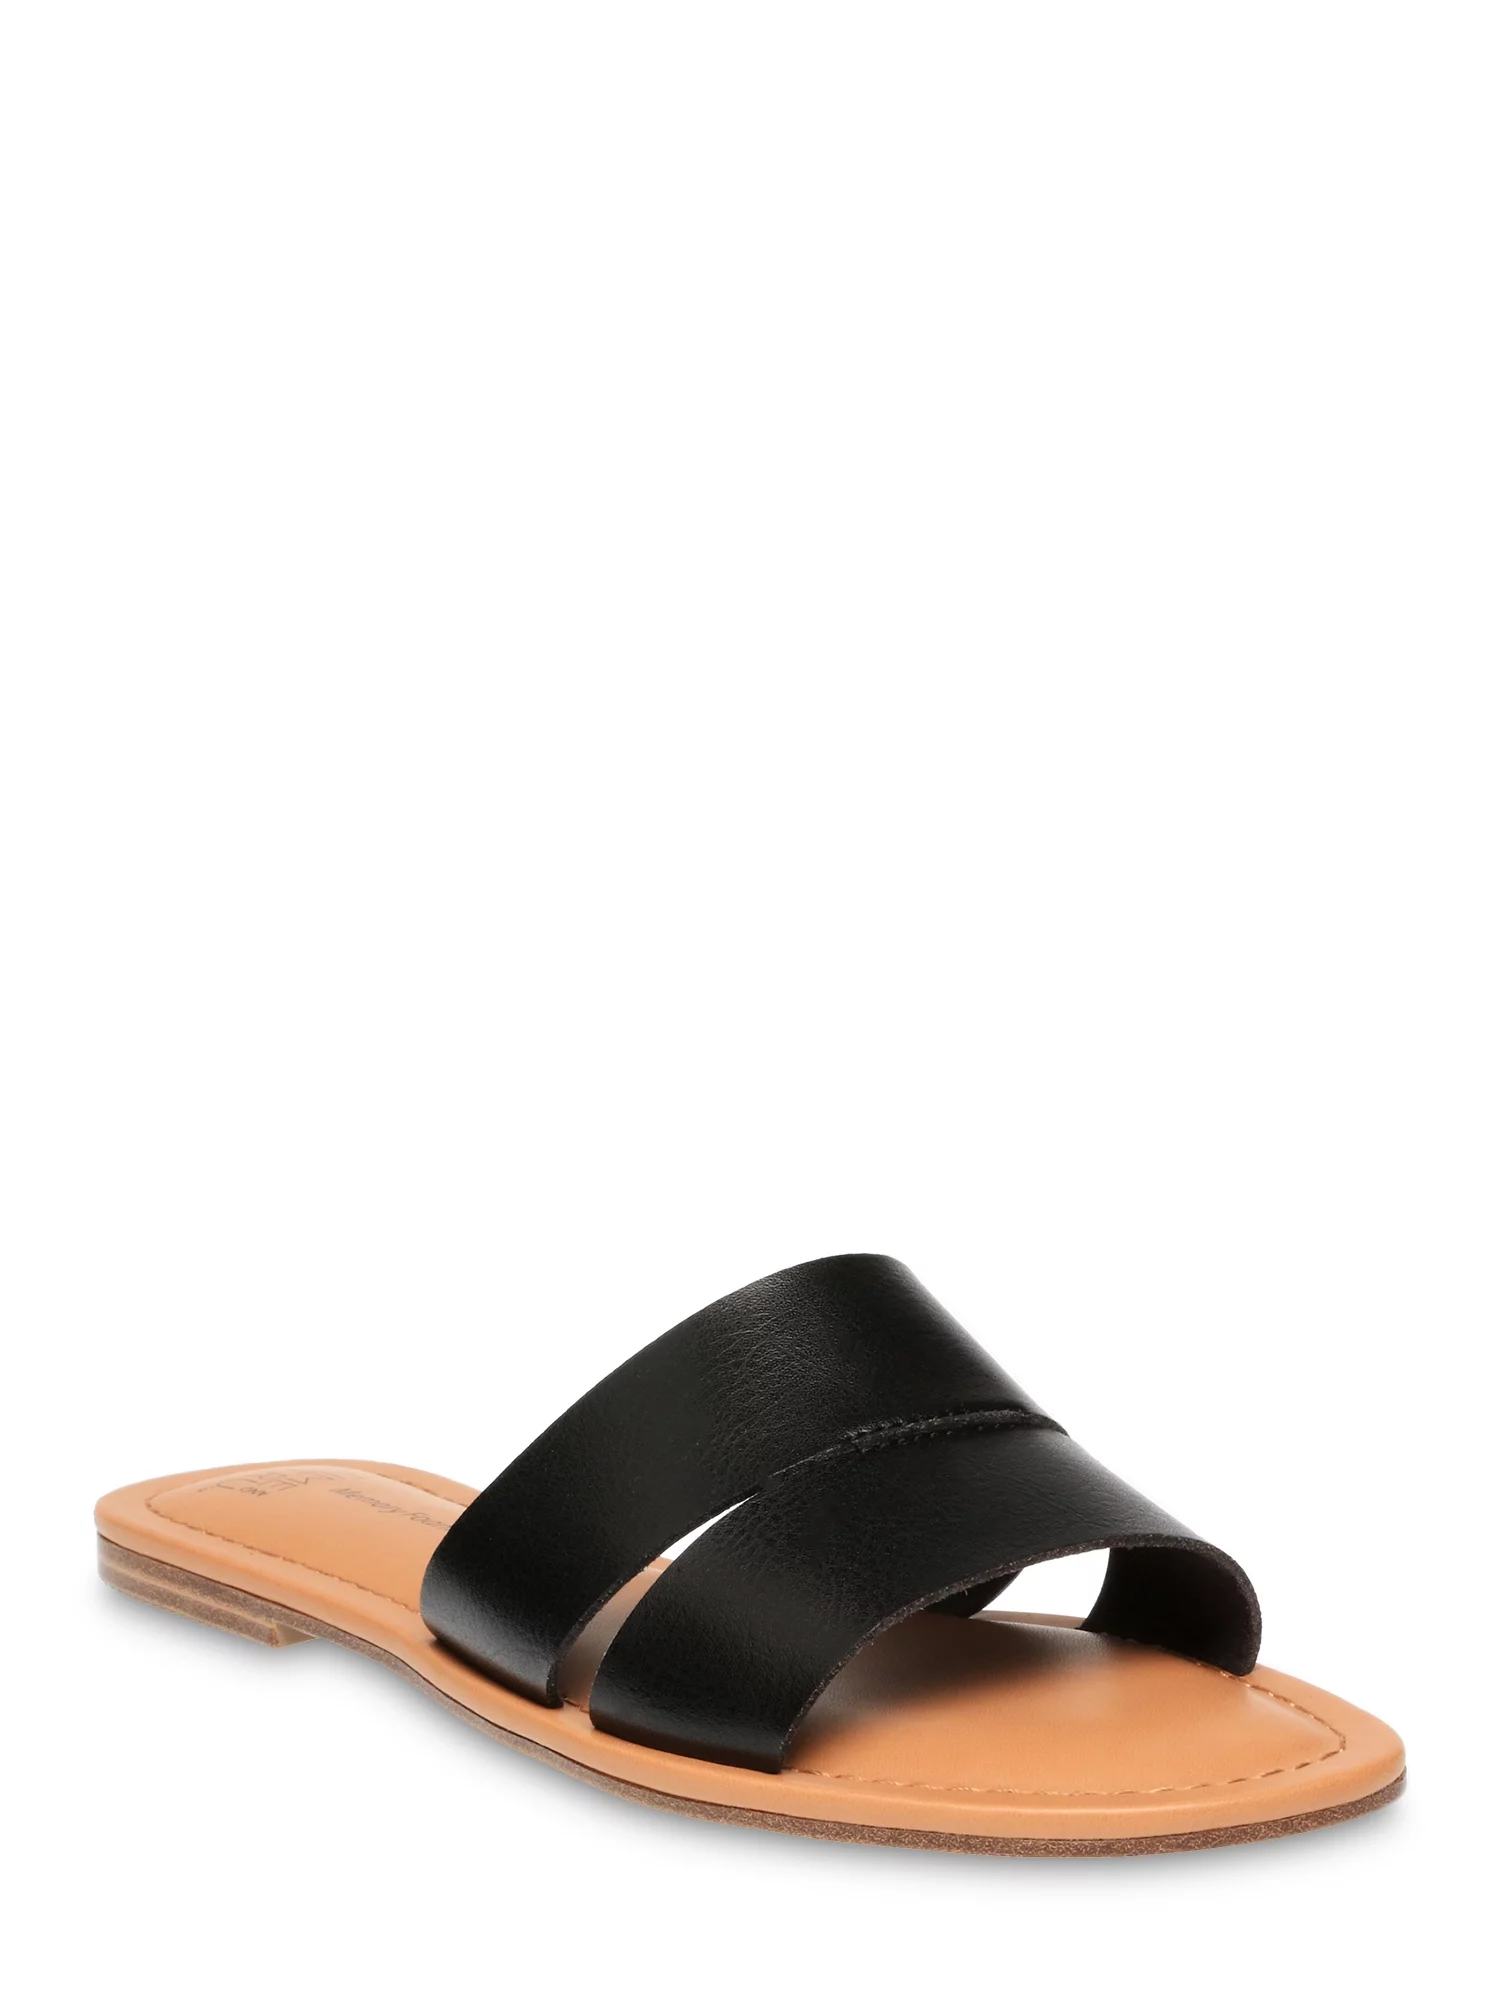 Time and Tru Women's H Band Slide Sandal